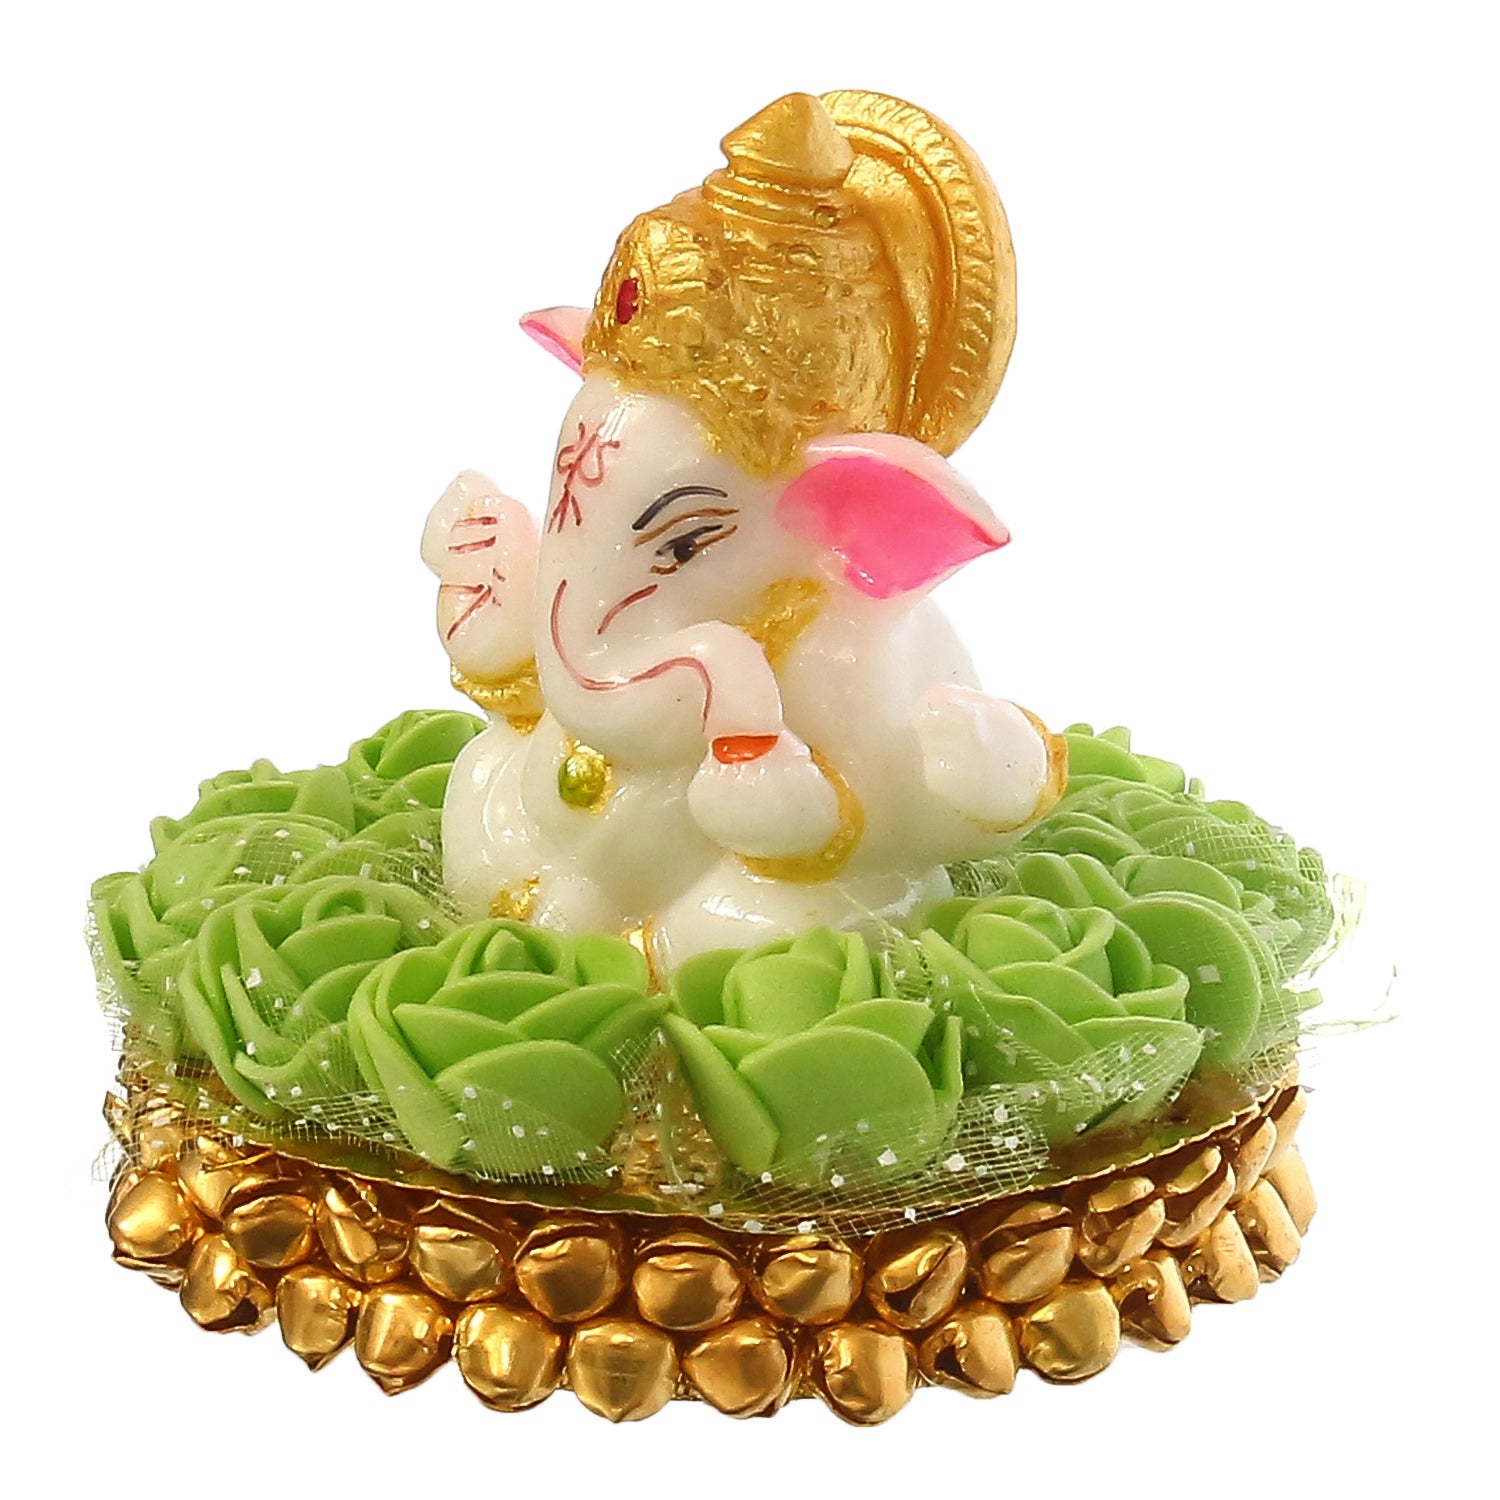 Lord Ganesha Idol on Decorative Handcrafted Plate with Green Flowers 5